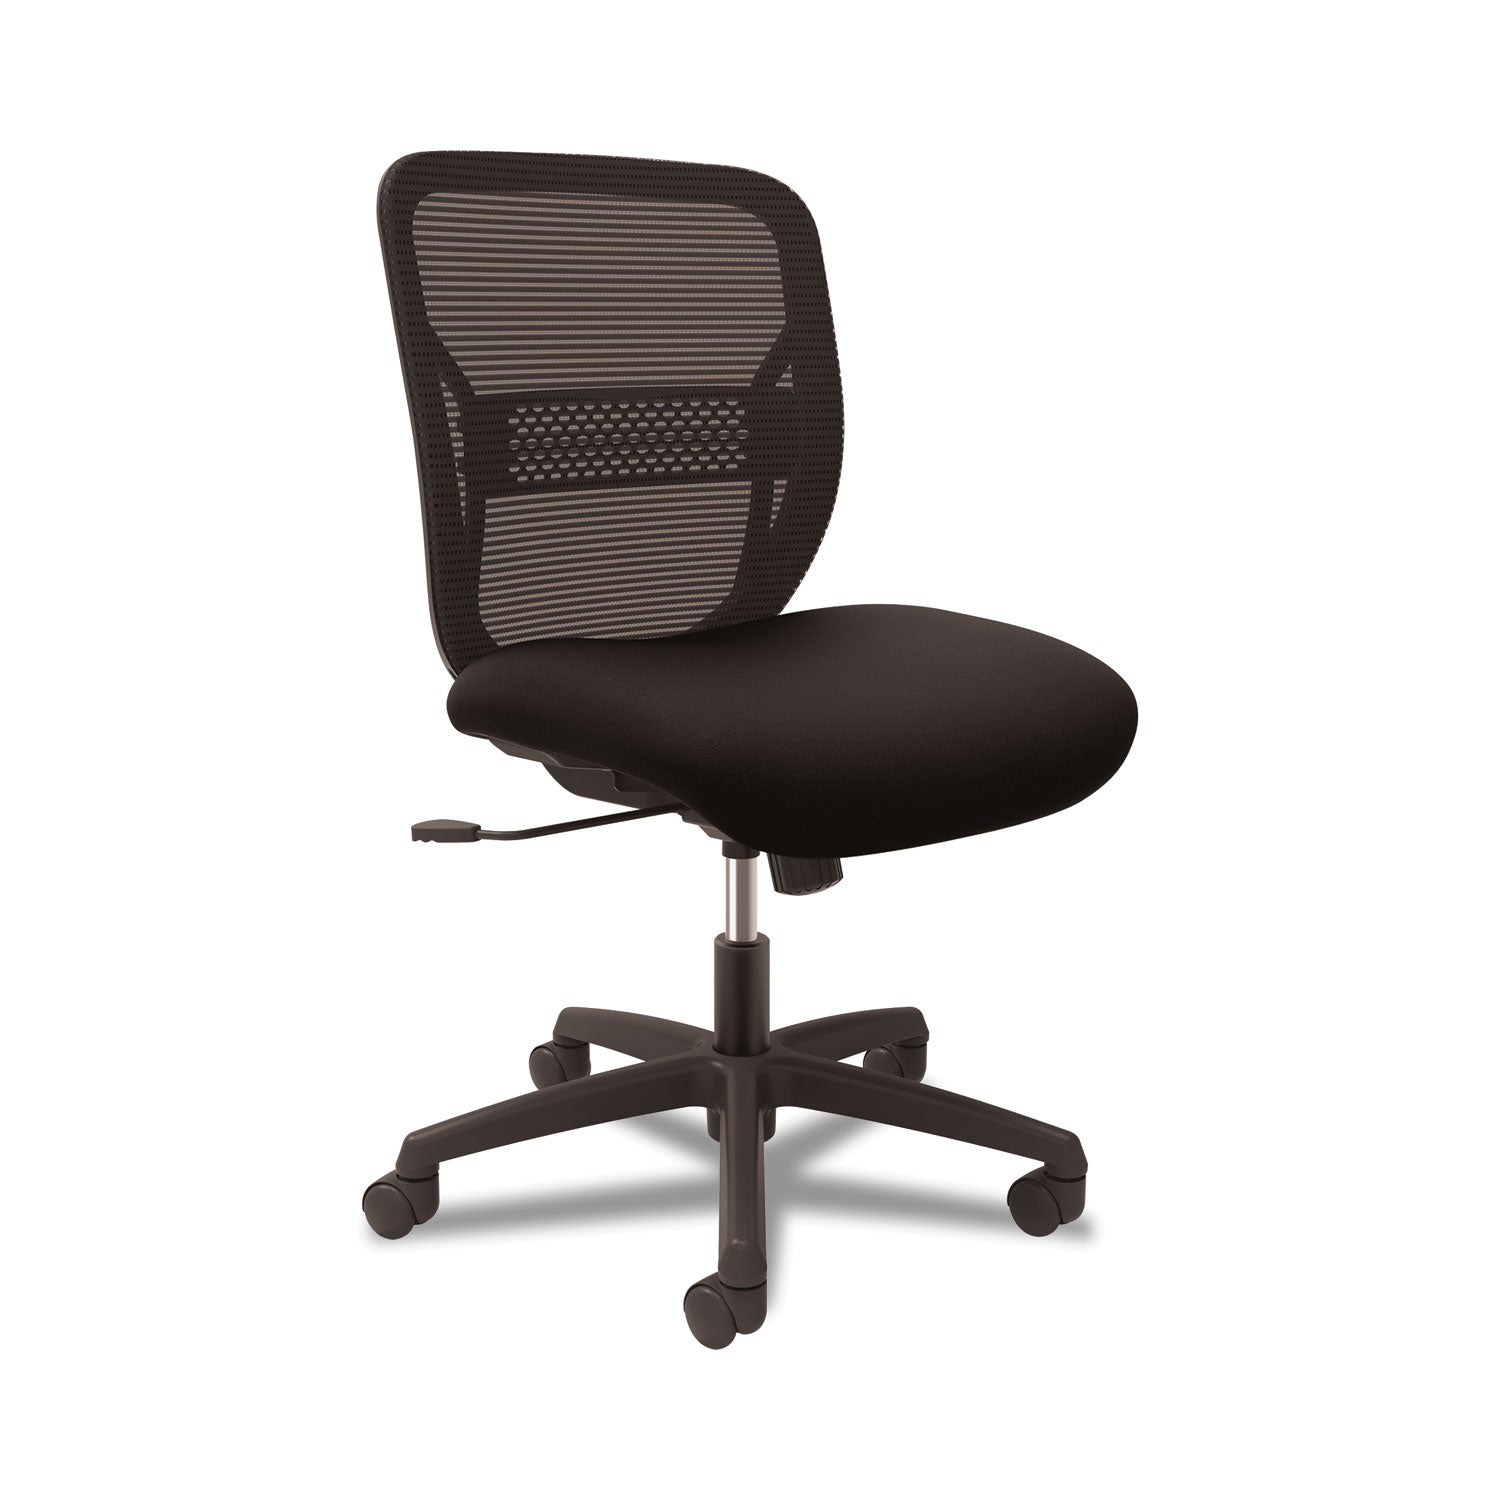 gateway-mid-back-task-chair-supports-up-to-250-lb-17-to-22-seat-height-black_hongvnmz1accf10 - 2